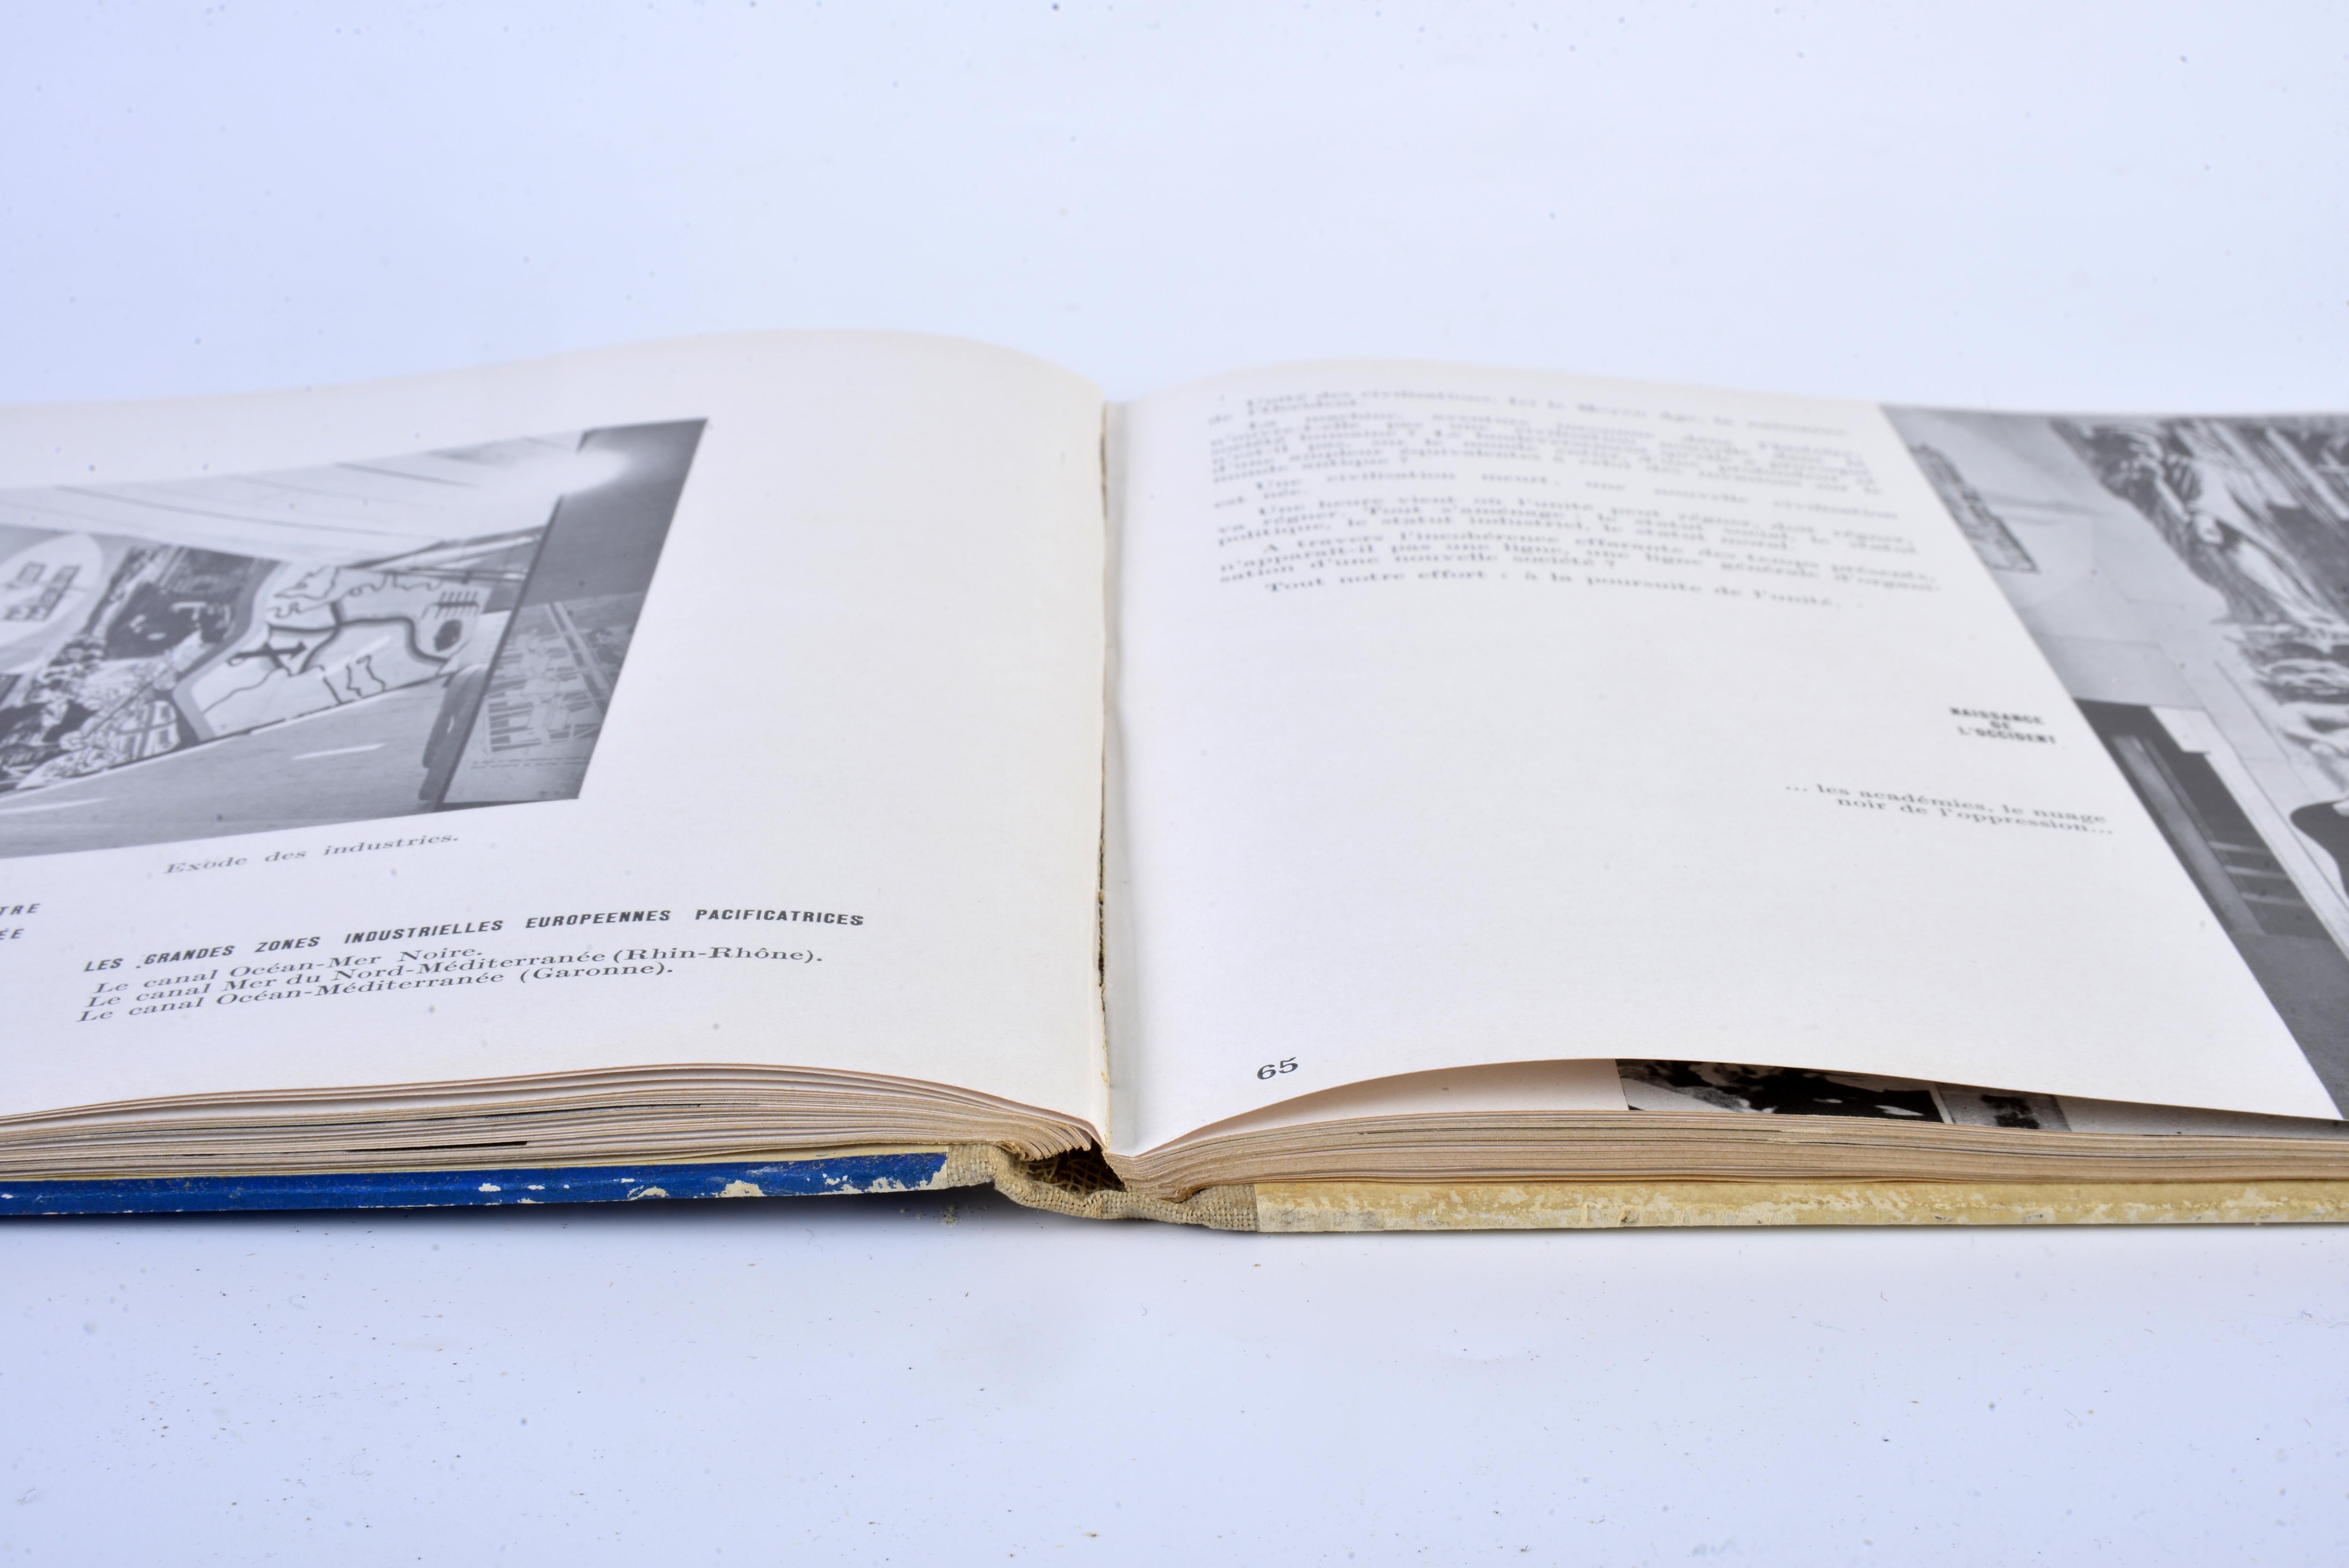 Architecture book by Le Corbusier published in France in 1938 For Sale 4